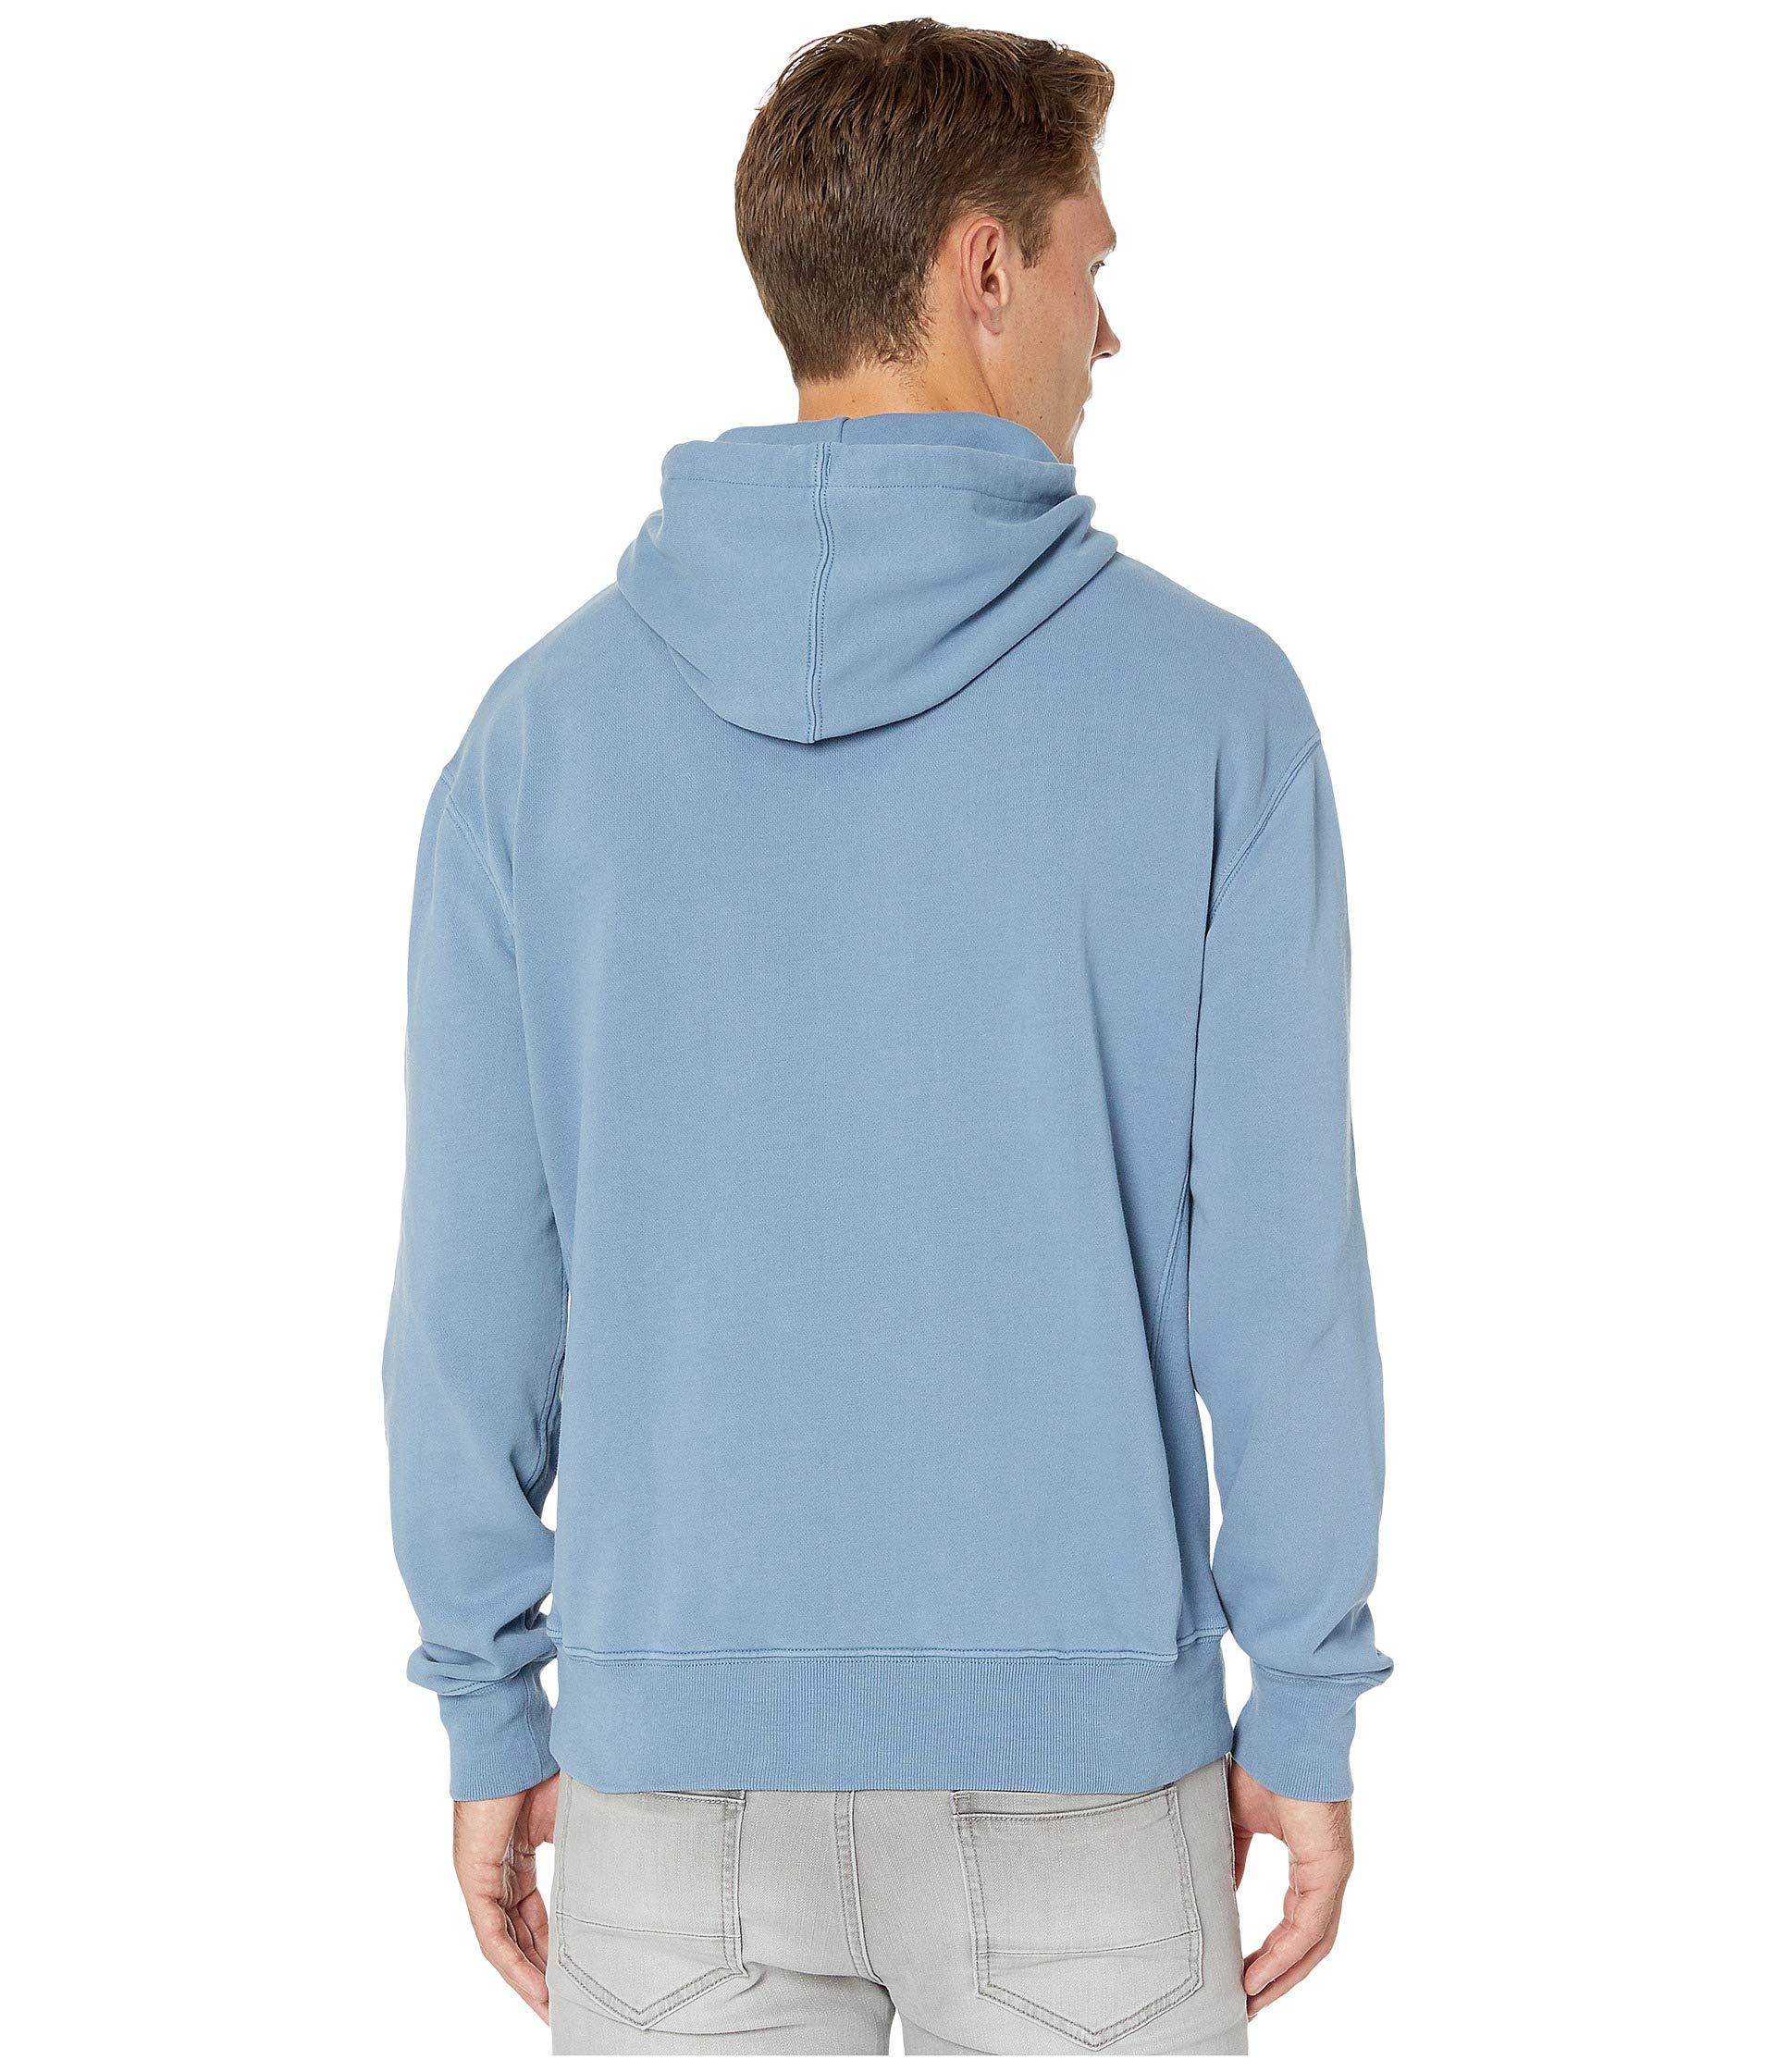 J.Crew Cotton Garment-dyed French Terry Hoodie in Blue for Men - Lyst